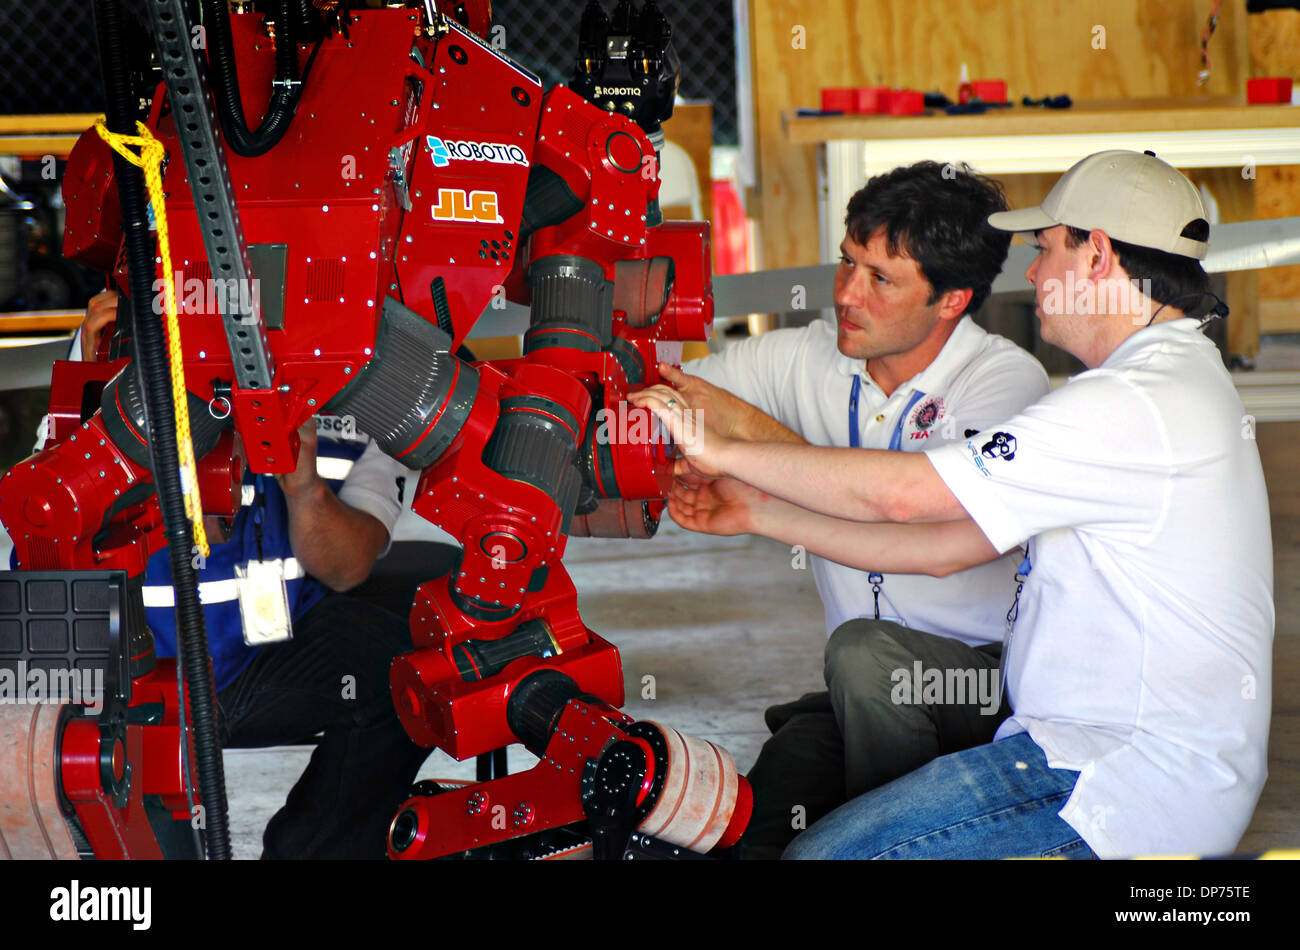 Technicians prepare the Robotiq 3-Finger Adaptive Robot Gripper robot during the DARPA Rescue Robot Showdown at Homestead Miami Speedway December 20, 2013 in Homestead, FL. The DARPA event is to challenge teams to design robots that will conduct humanitarian, disaster relief and related operations. Stock Photo